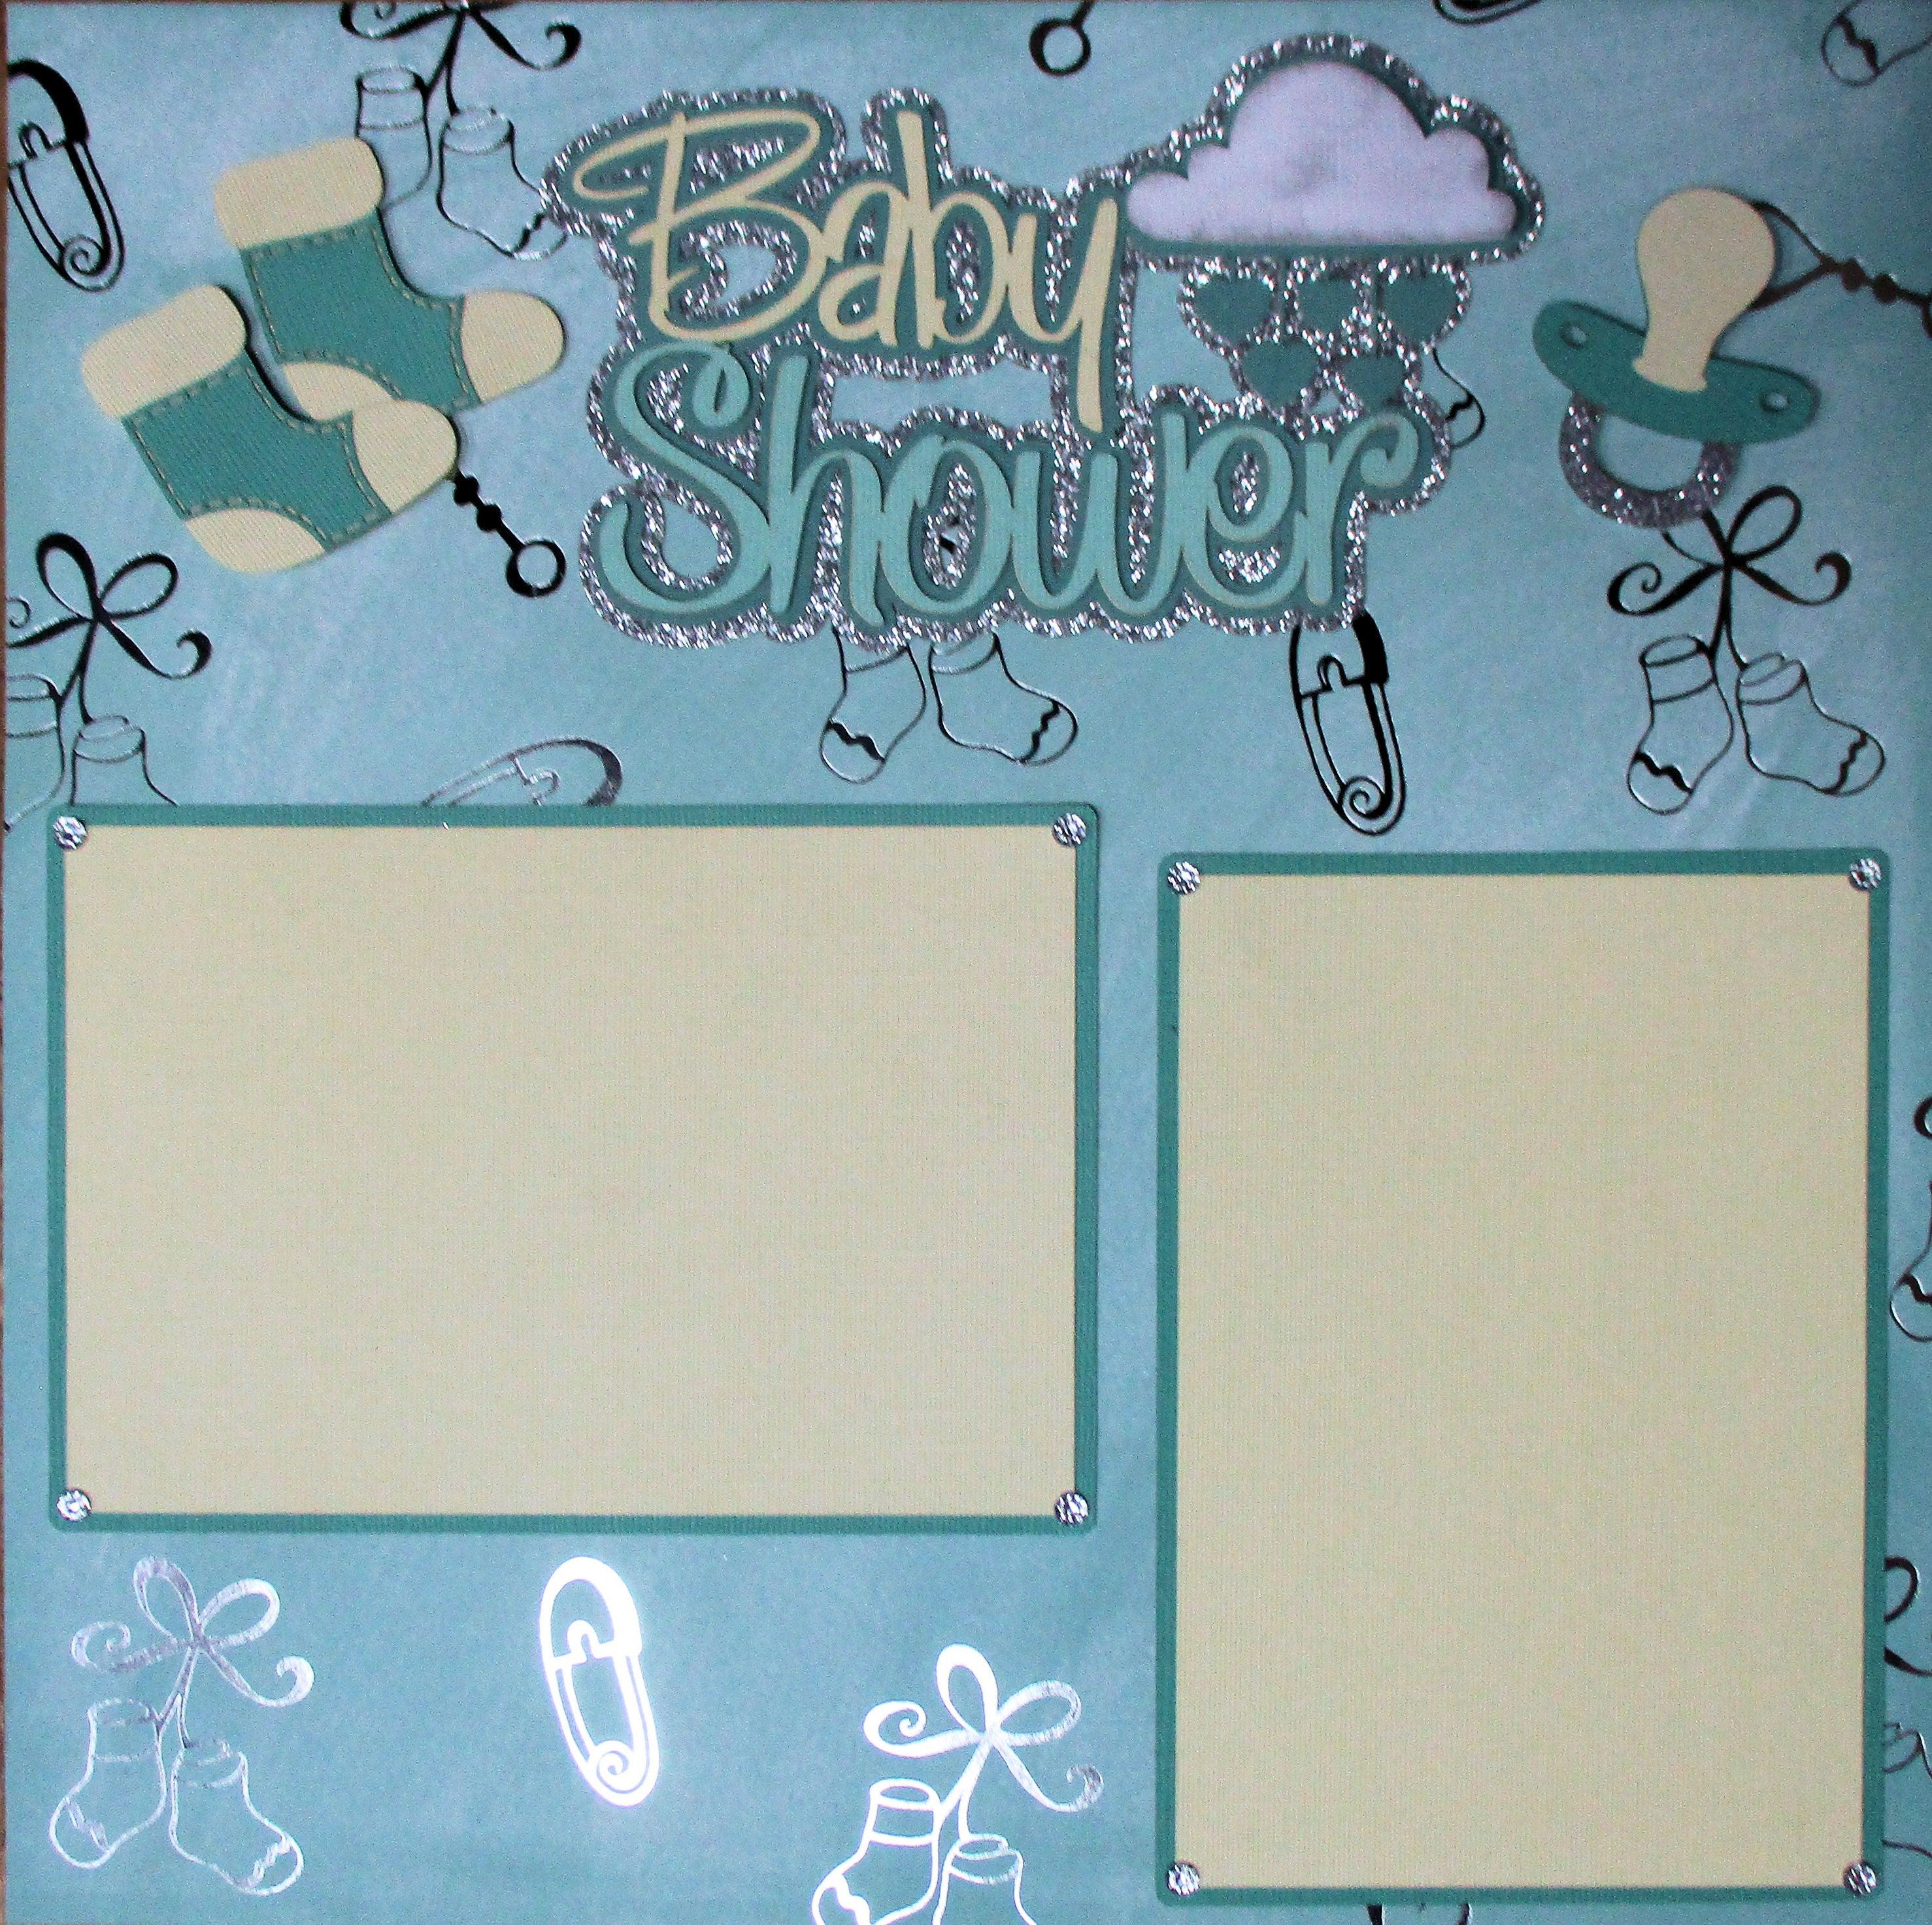 Baby Shower 2 - 12 x 12 Pages - Premade, Fully-Assembled and Hand-Embellished Scrapbook Premade by SSC Designs - Scrapbook Supply Companies